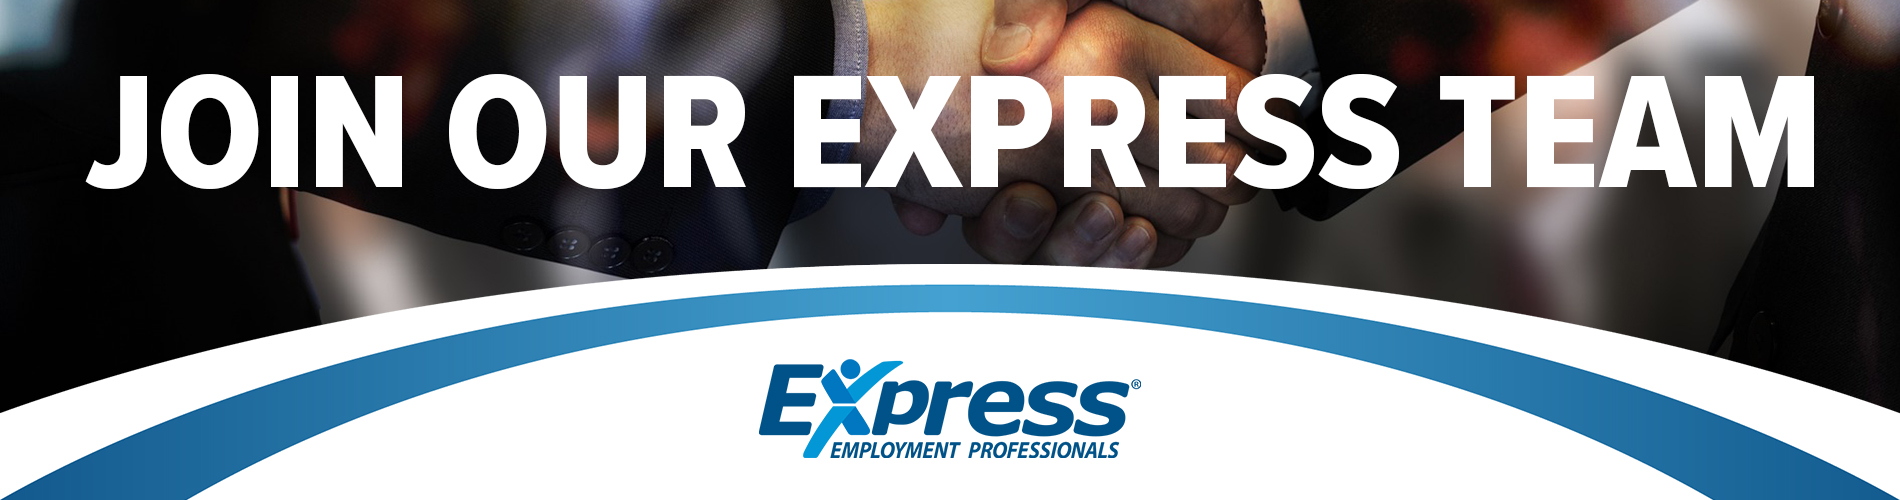 Join Our Express Team, Staffing Jobs in Rantoul-Gibson City